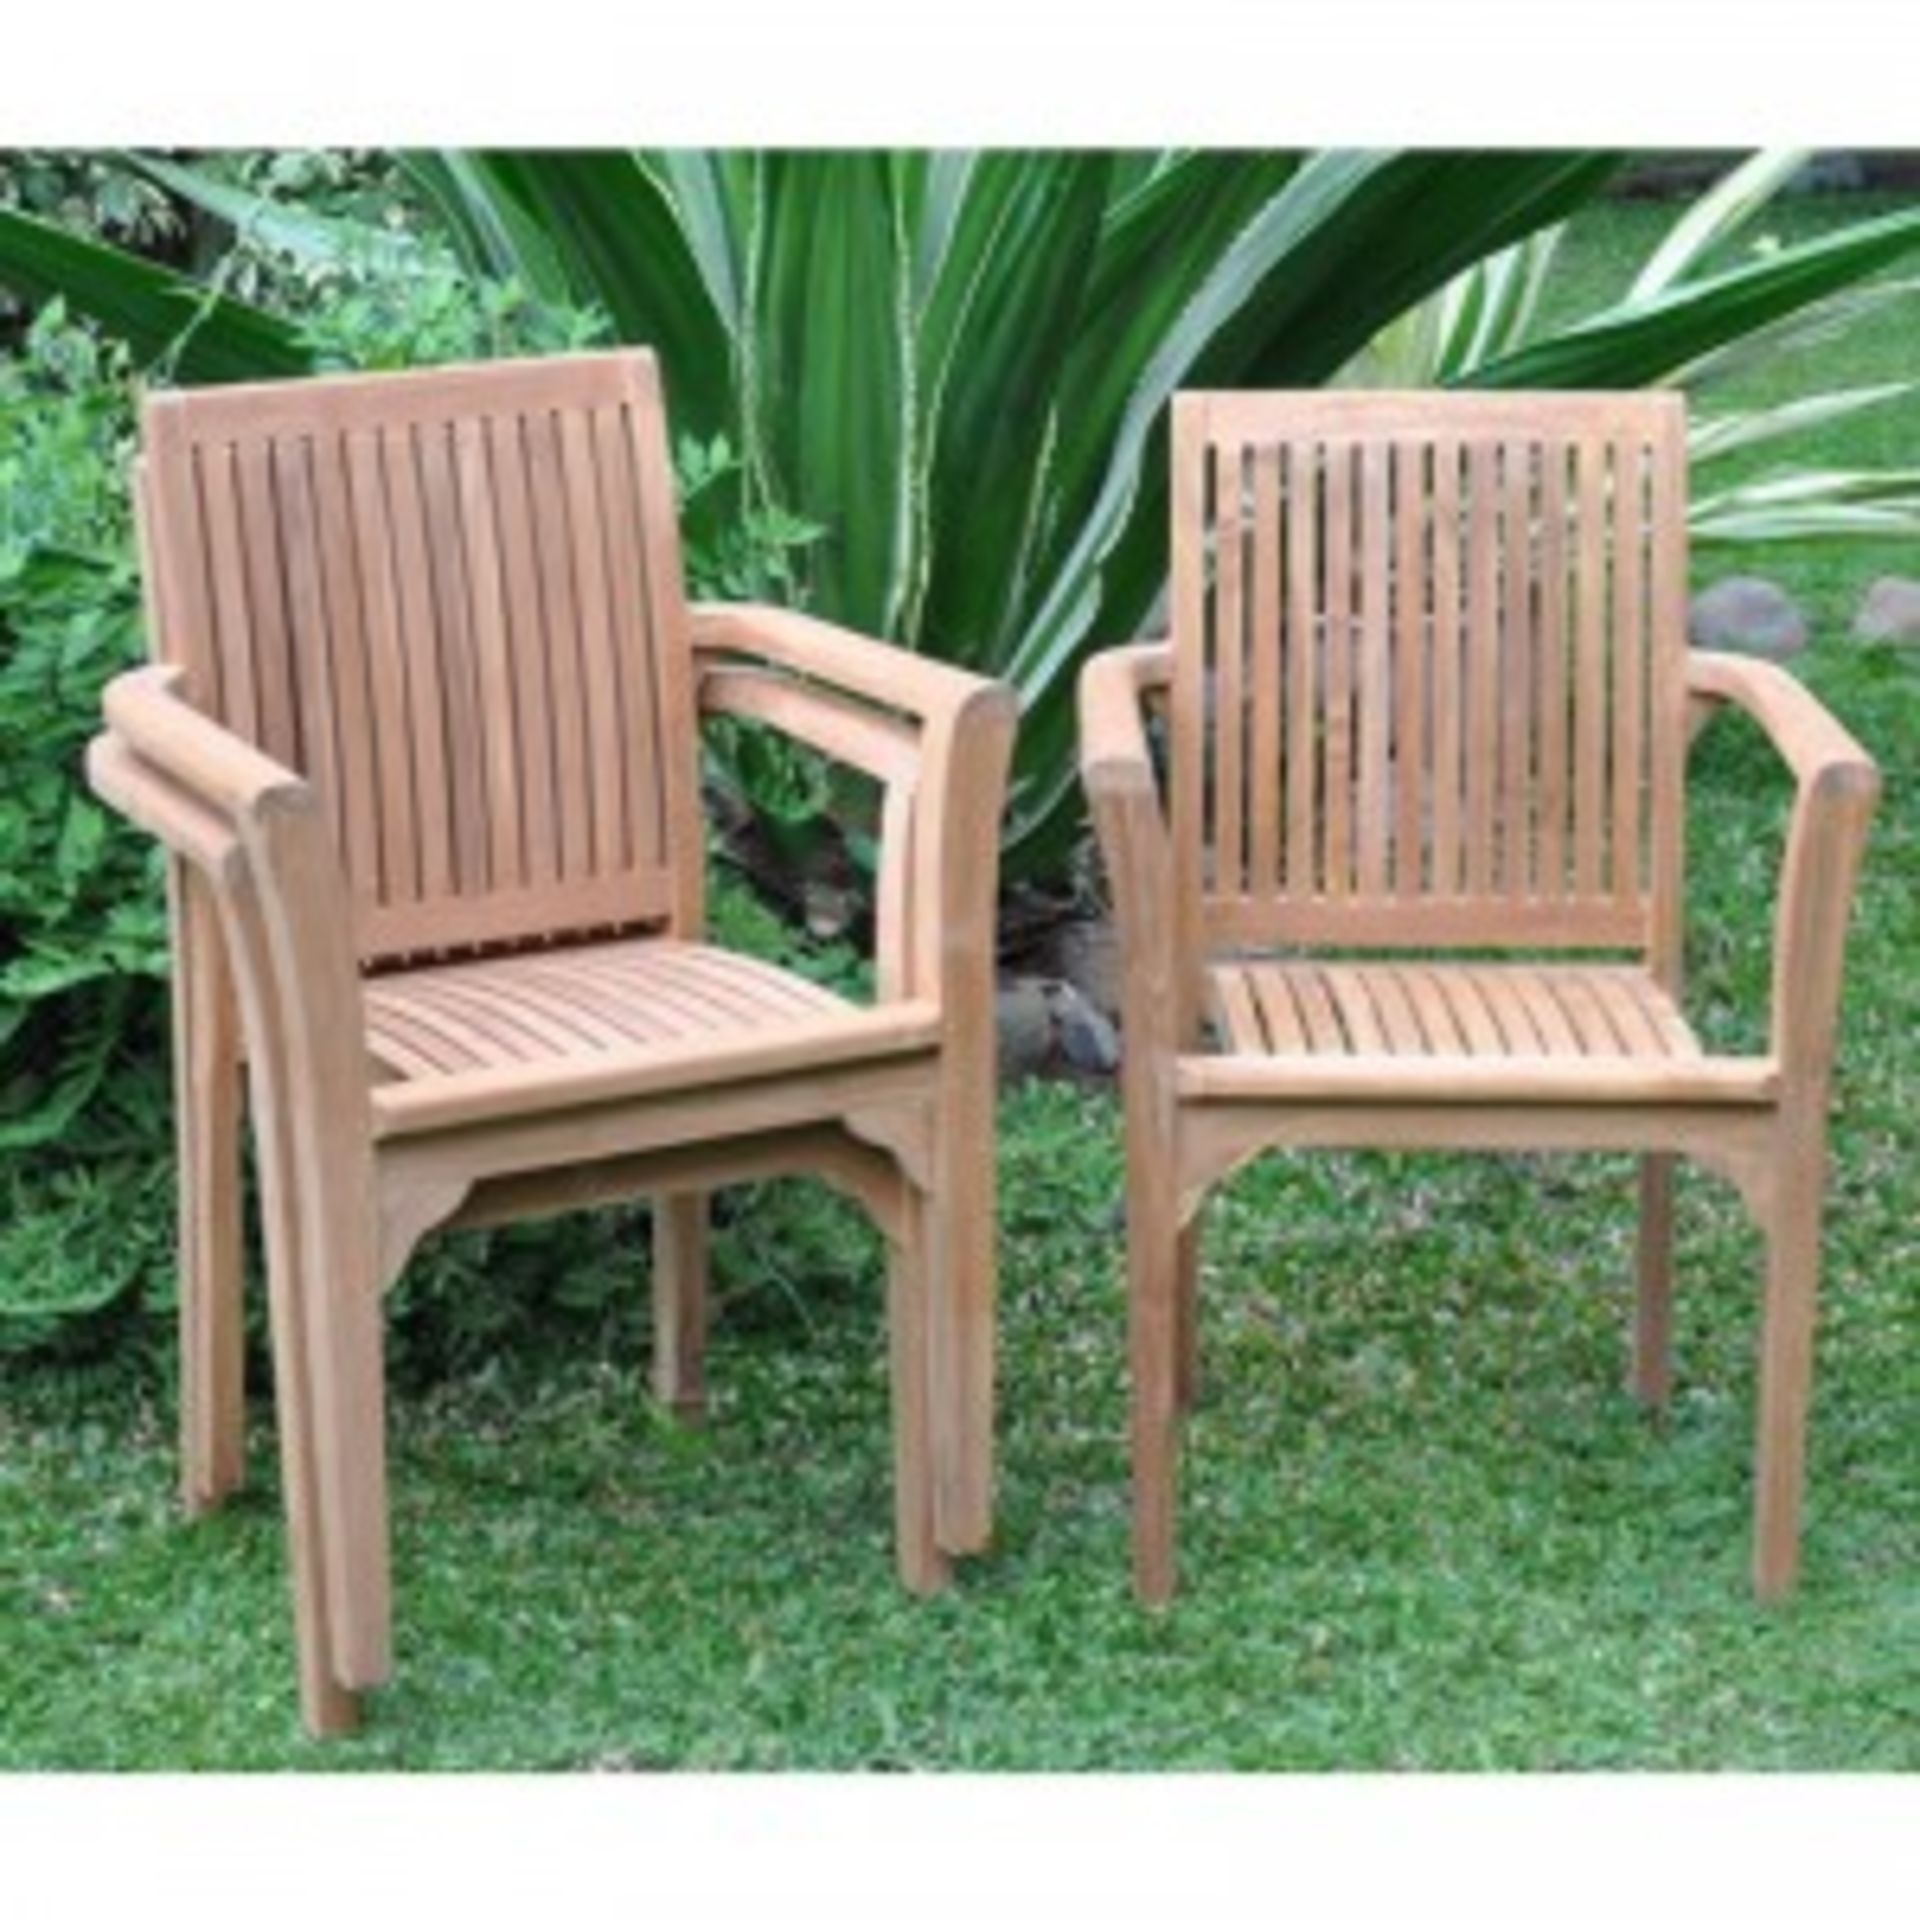 V Brand New TEAK STACKING CHAIR - Made From Grade A Plantation Teak/ RRP £199/ NOTE: Item Is - Image 2 of 2